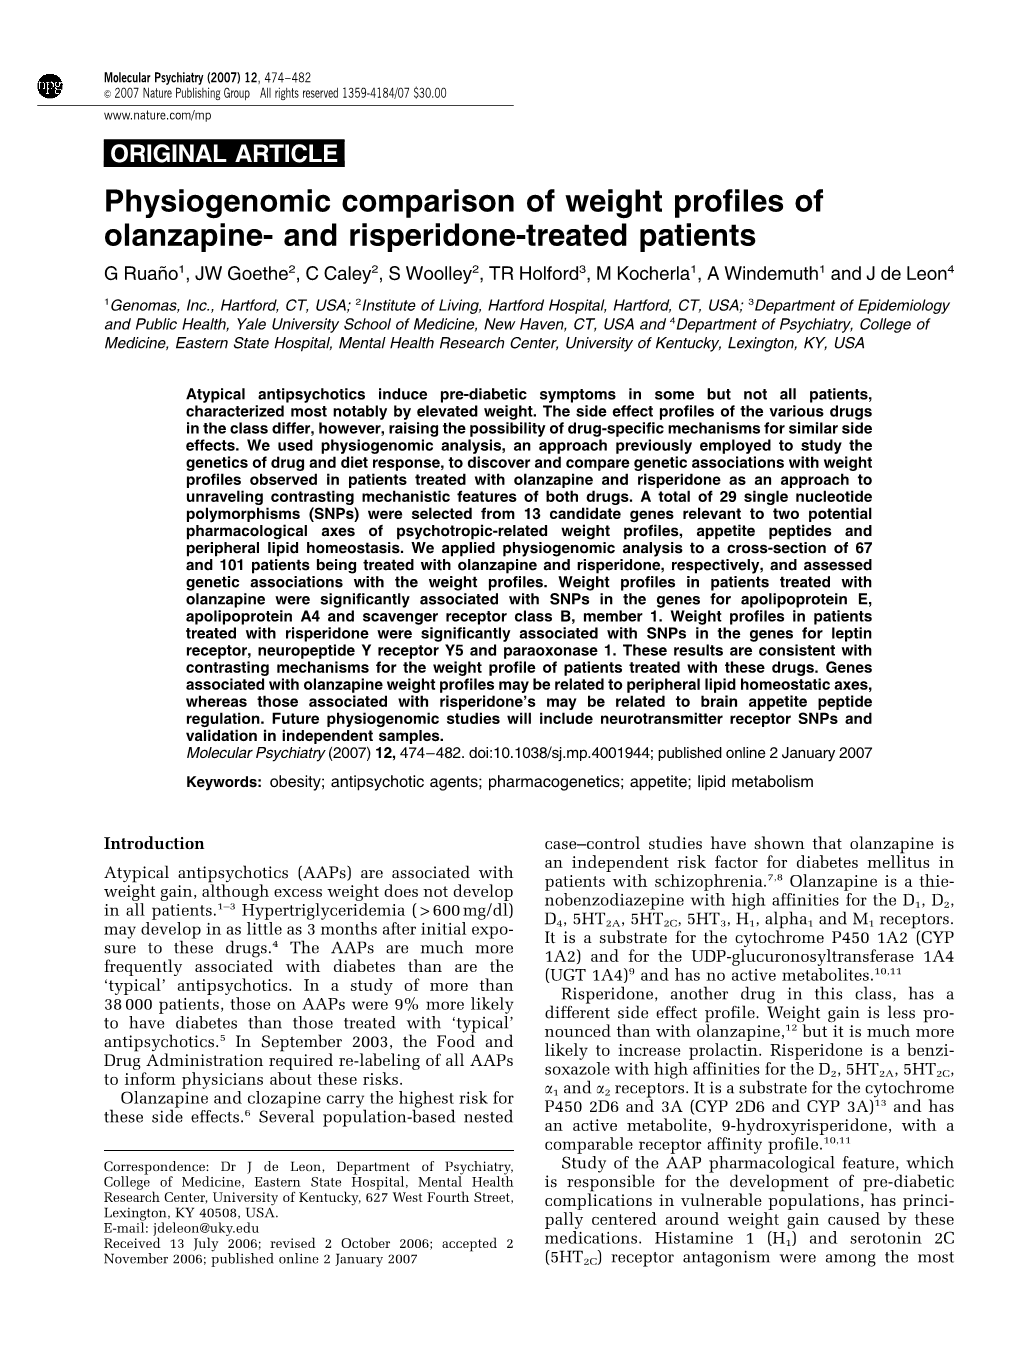 Physiogenomic Comparison of Weight Profiles of Olanzapine